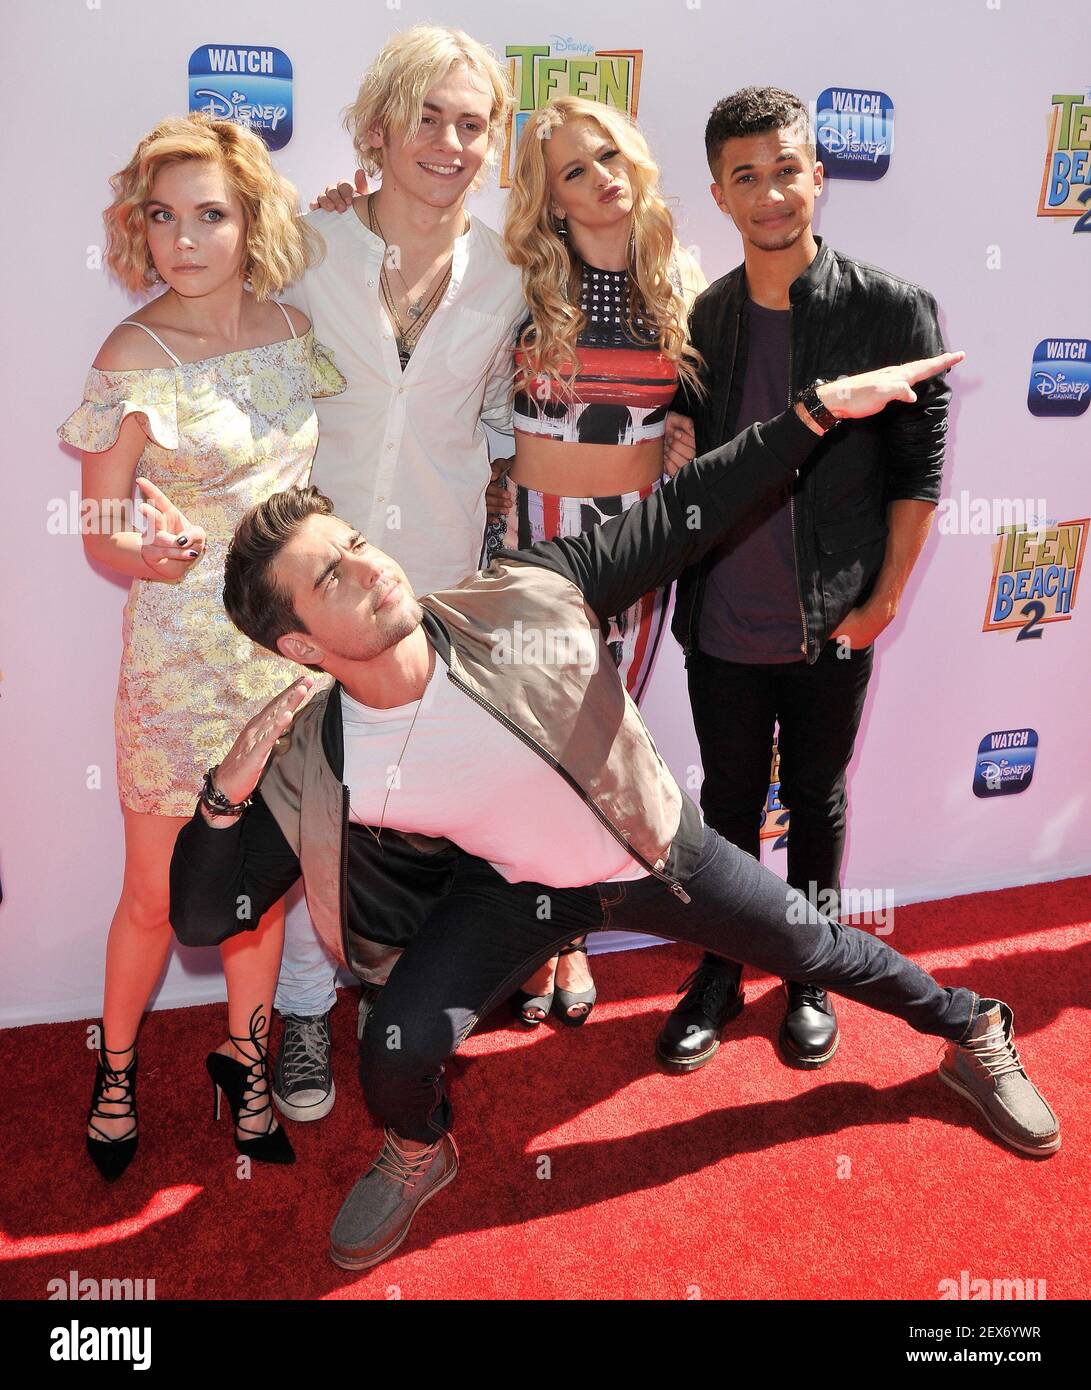 L-R) Grace Phipps, Ross Lynch, Mollee Gray, Jordan Fisher Johnny DeLuca arrives at The Channel's "Teen Beach 2" Los Angeles Premiere held at the Walt Disney Studios in Burbank, CA